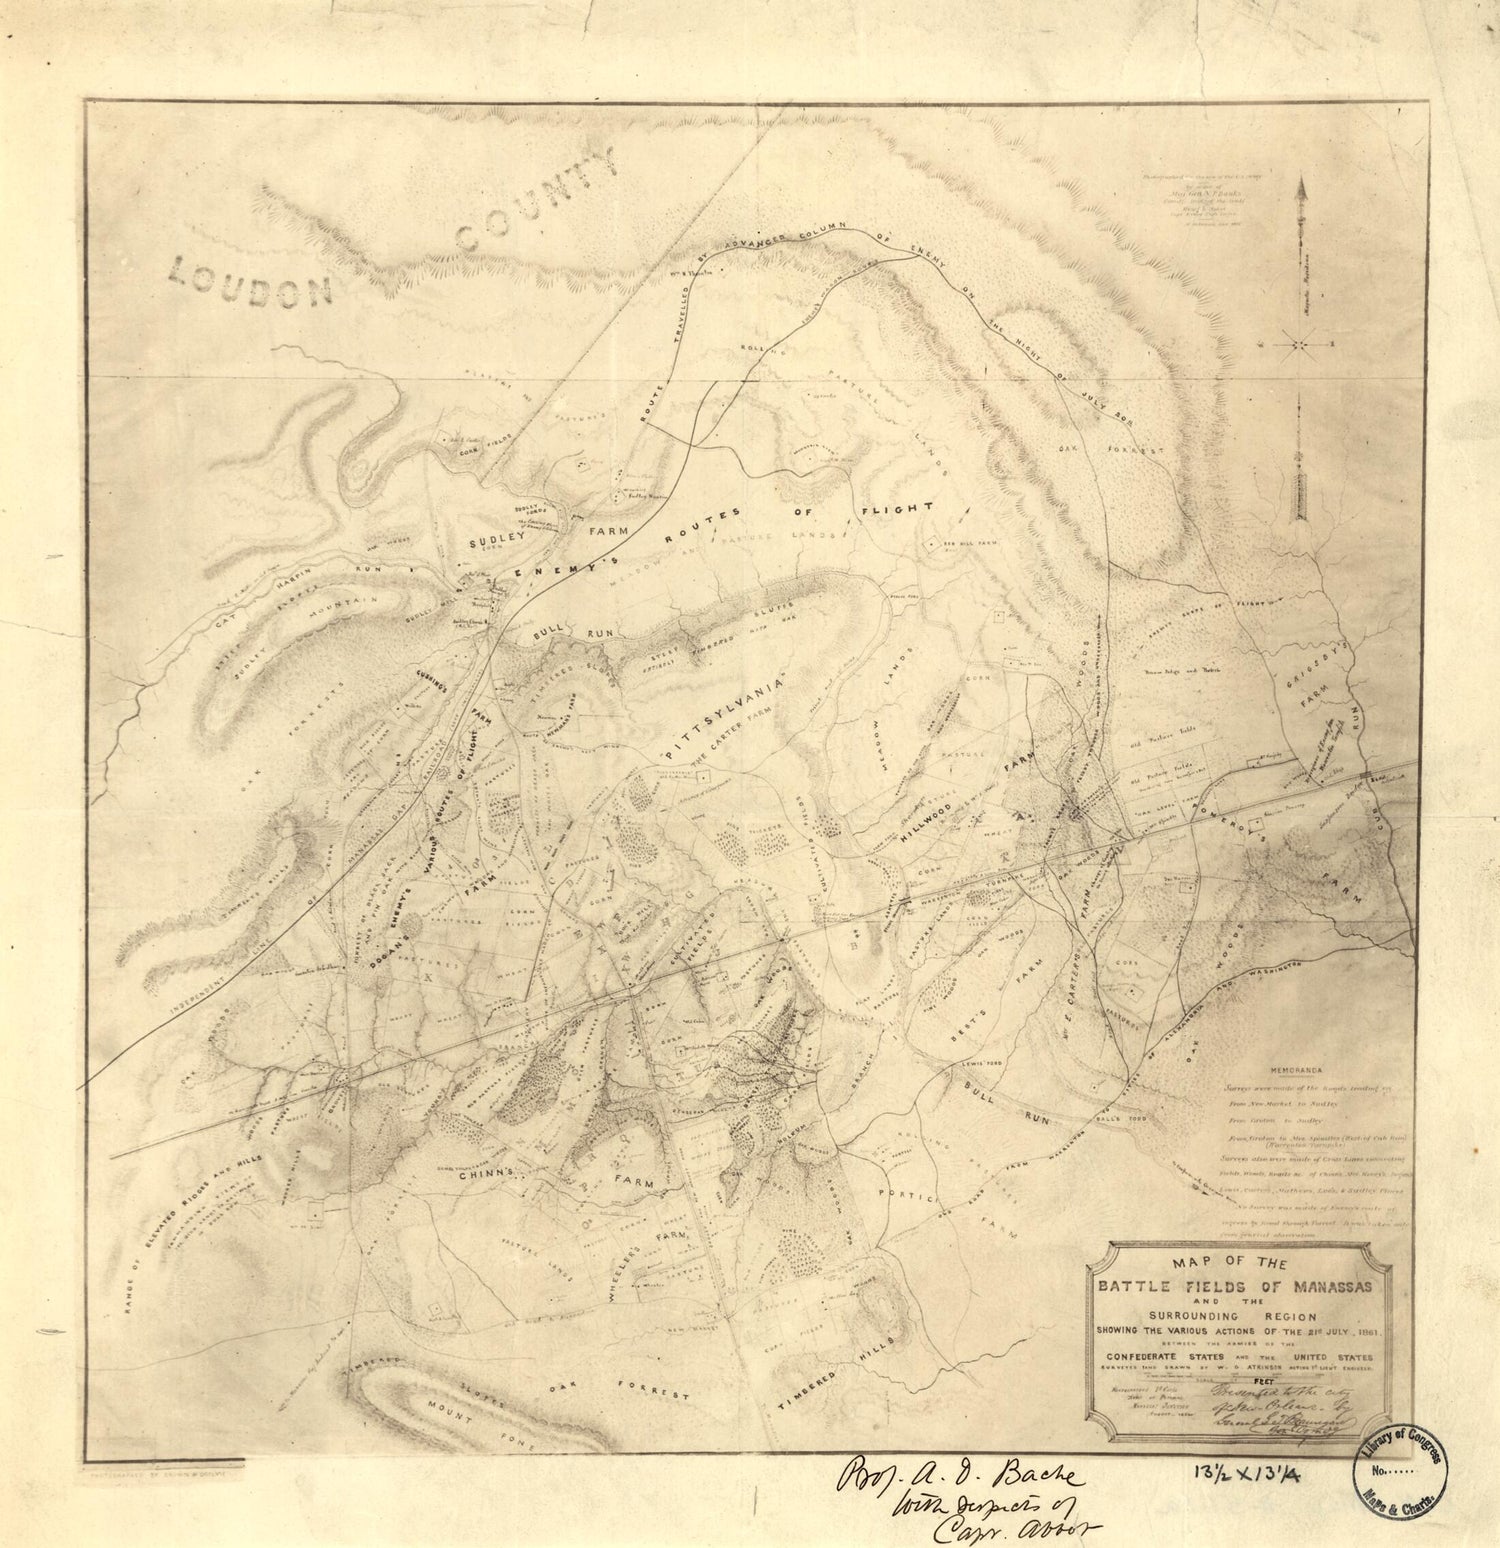 This old map of Map of the Battle Fields of Manassas and the Surrounding Region : Showing the Various Actions of the 21st July, 1861, Between the Armies of the Confederate States and the United States from 1862 was created by W. G. Atkinson in 1862